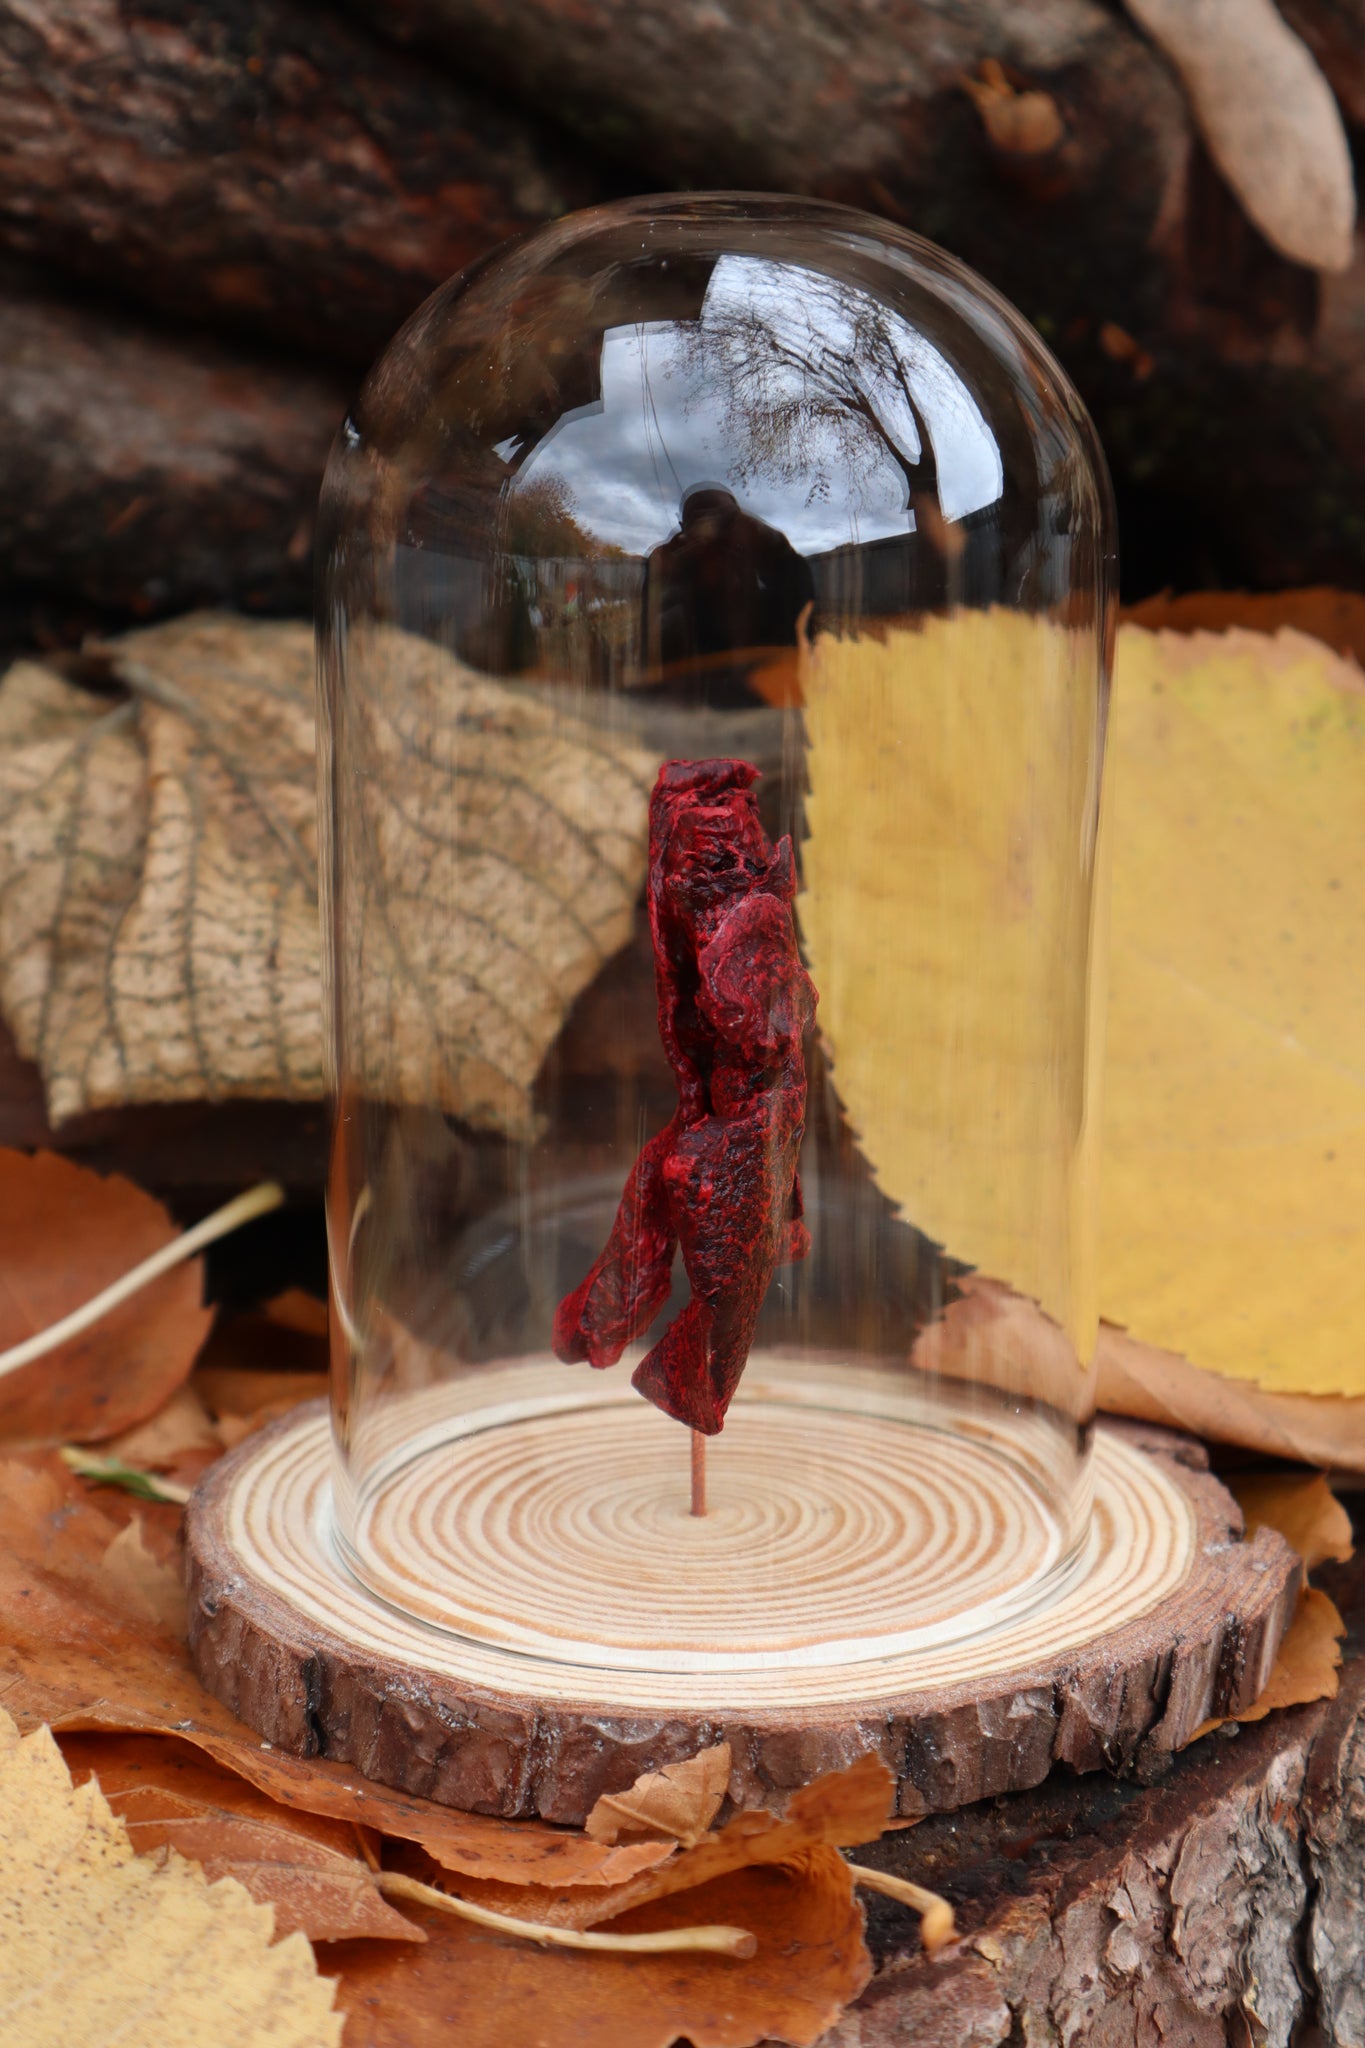 Dry Preserved Polydactyl Cat Lungs in Glass Dome